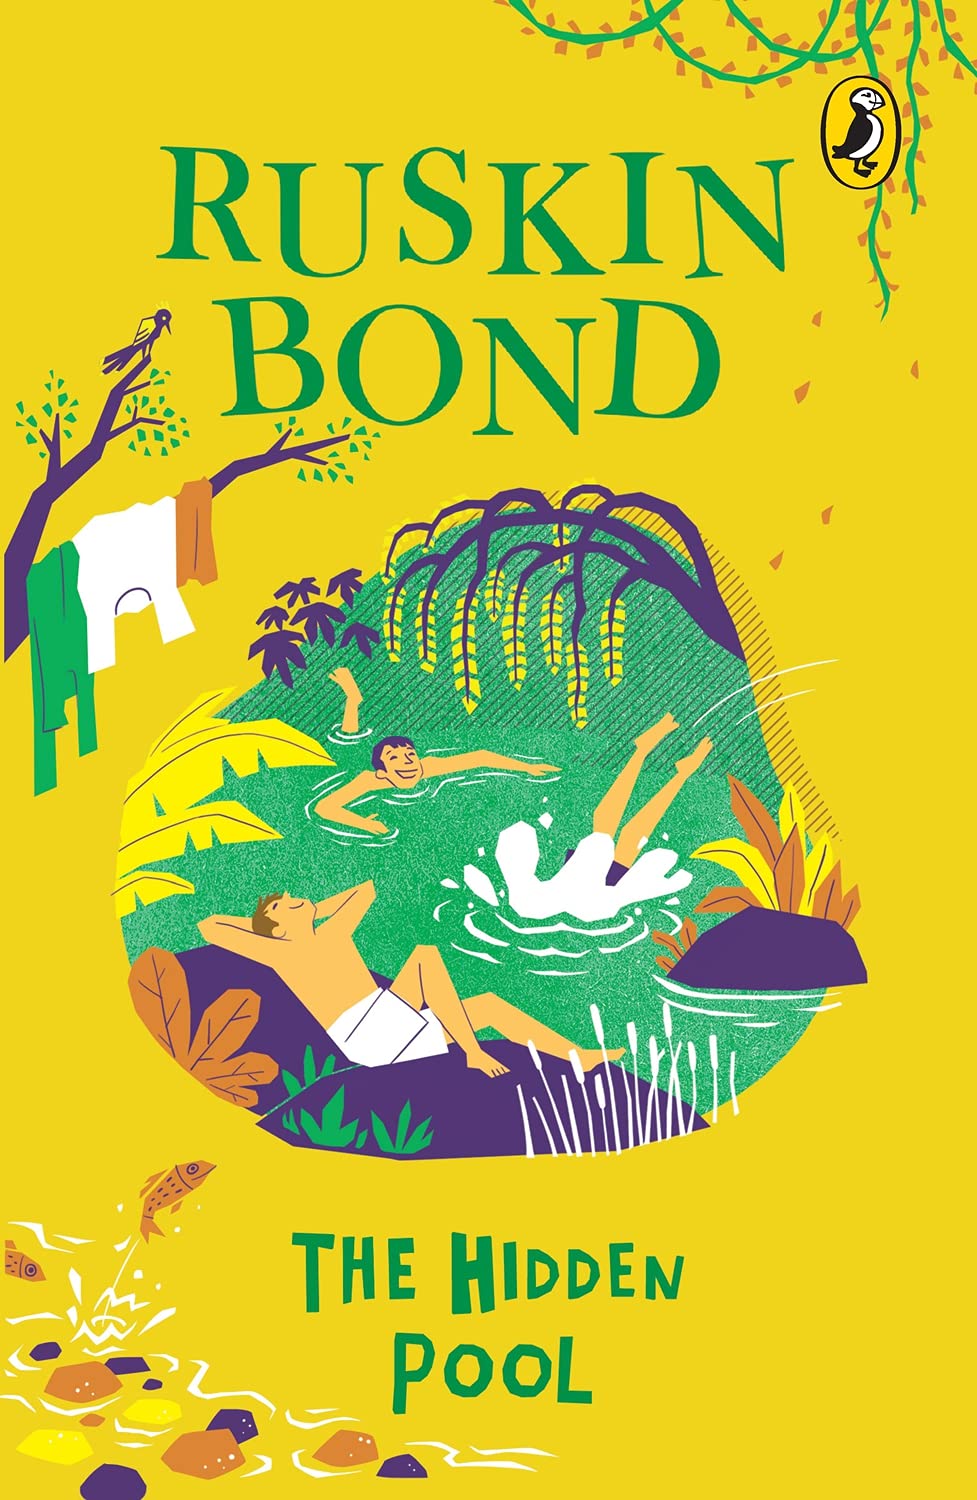 book review of any book of ruskin bond